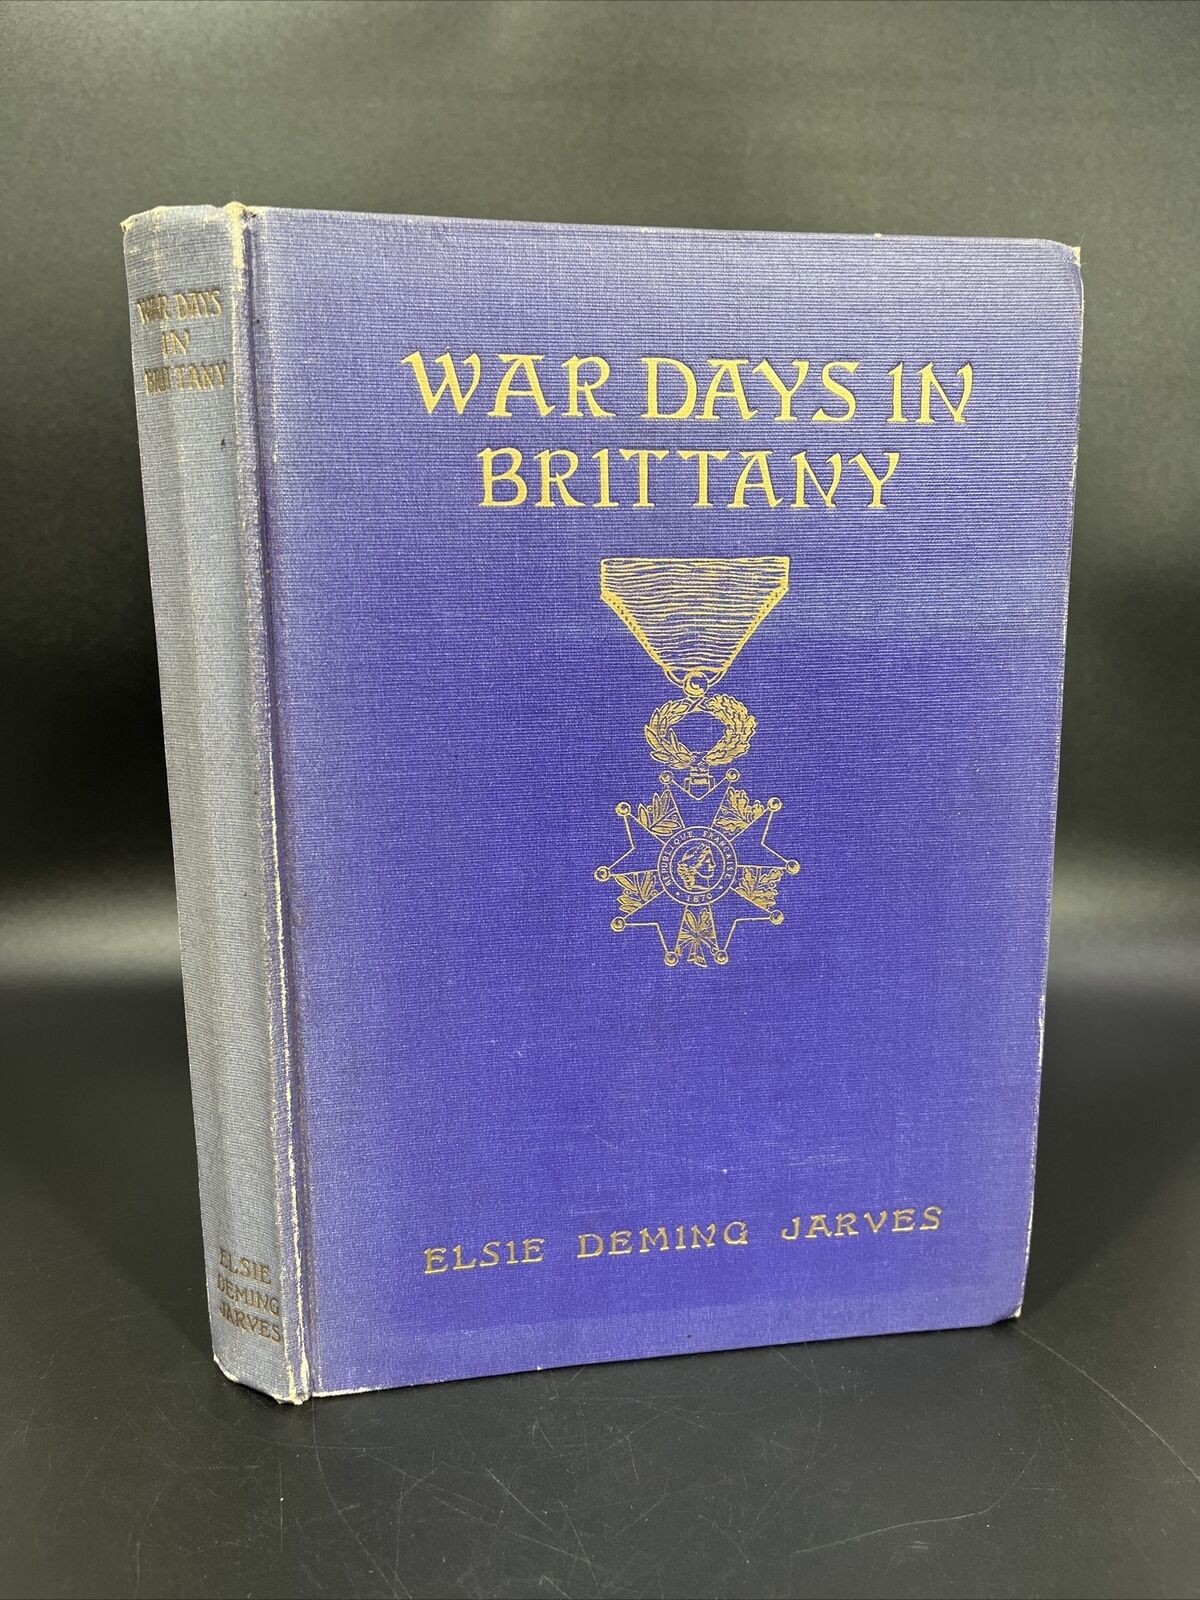 War Days In Brittany, Elsie D. Jarves - WWI Rare Book 1920 - Limited Private Ed